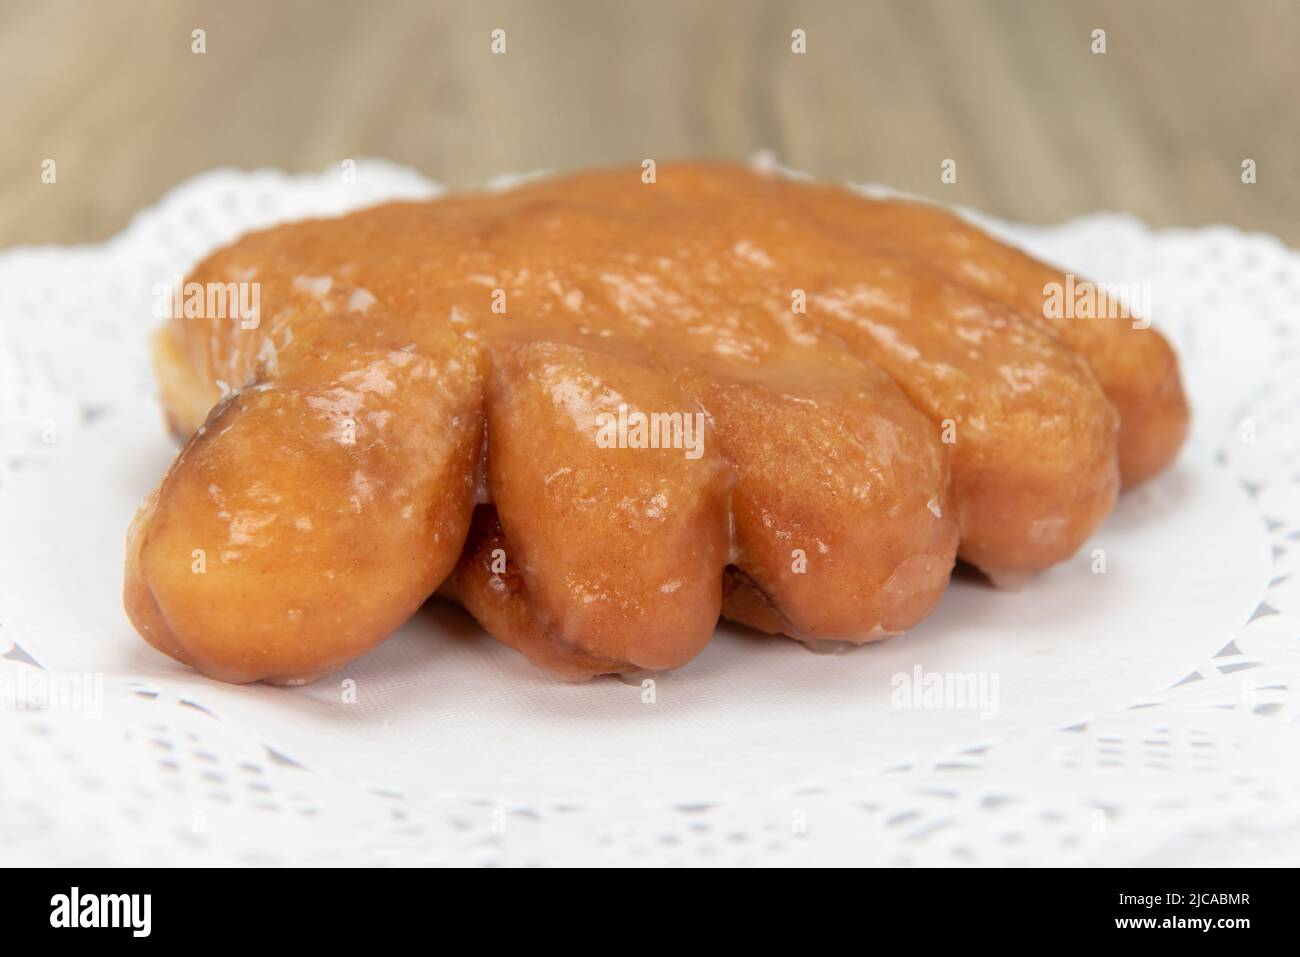 Tempting fresh from the oven bear claw donut from the bakery served on a plate. Stock Photo